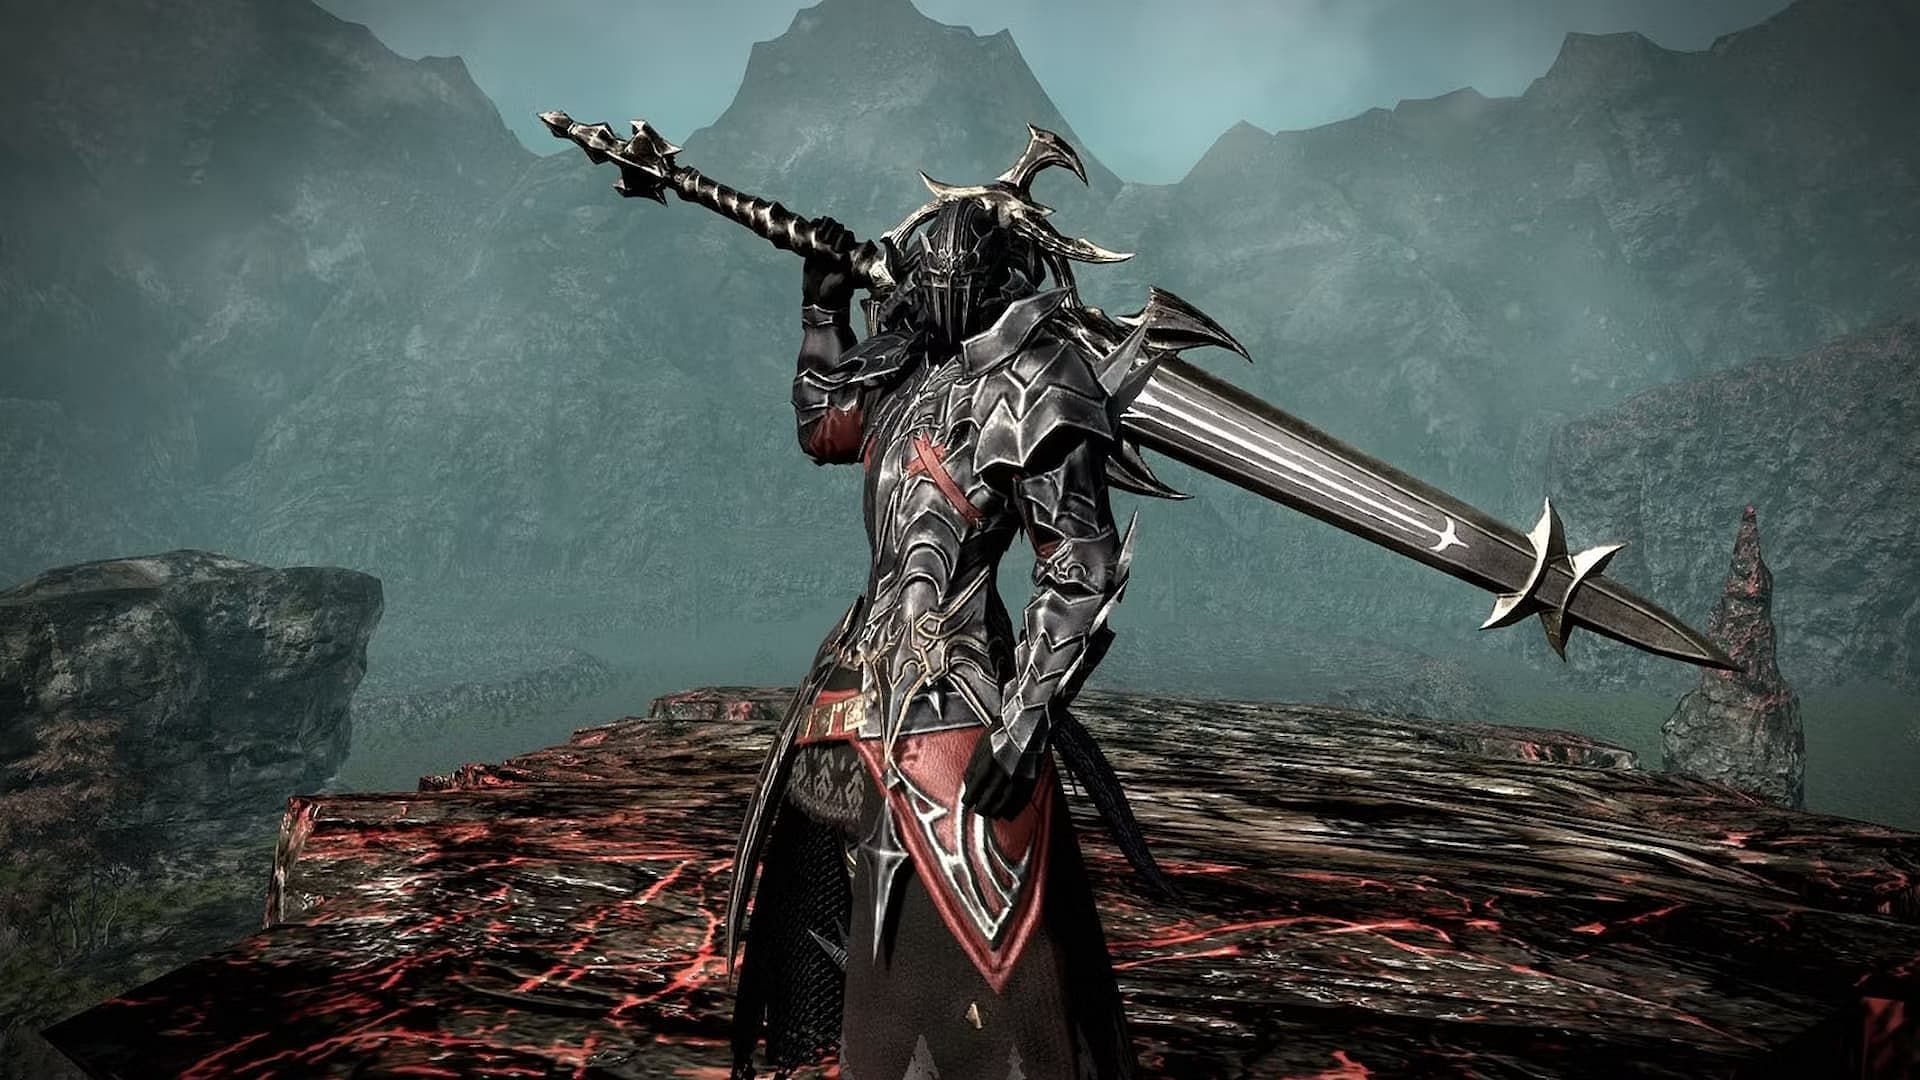 Dark Knight is a strong job choice in Final Fantasy 14 (Image via Square Enix)